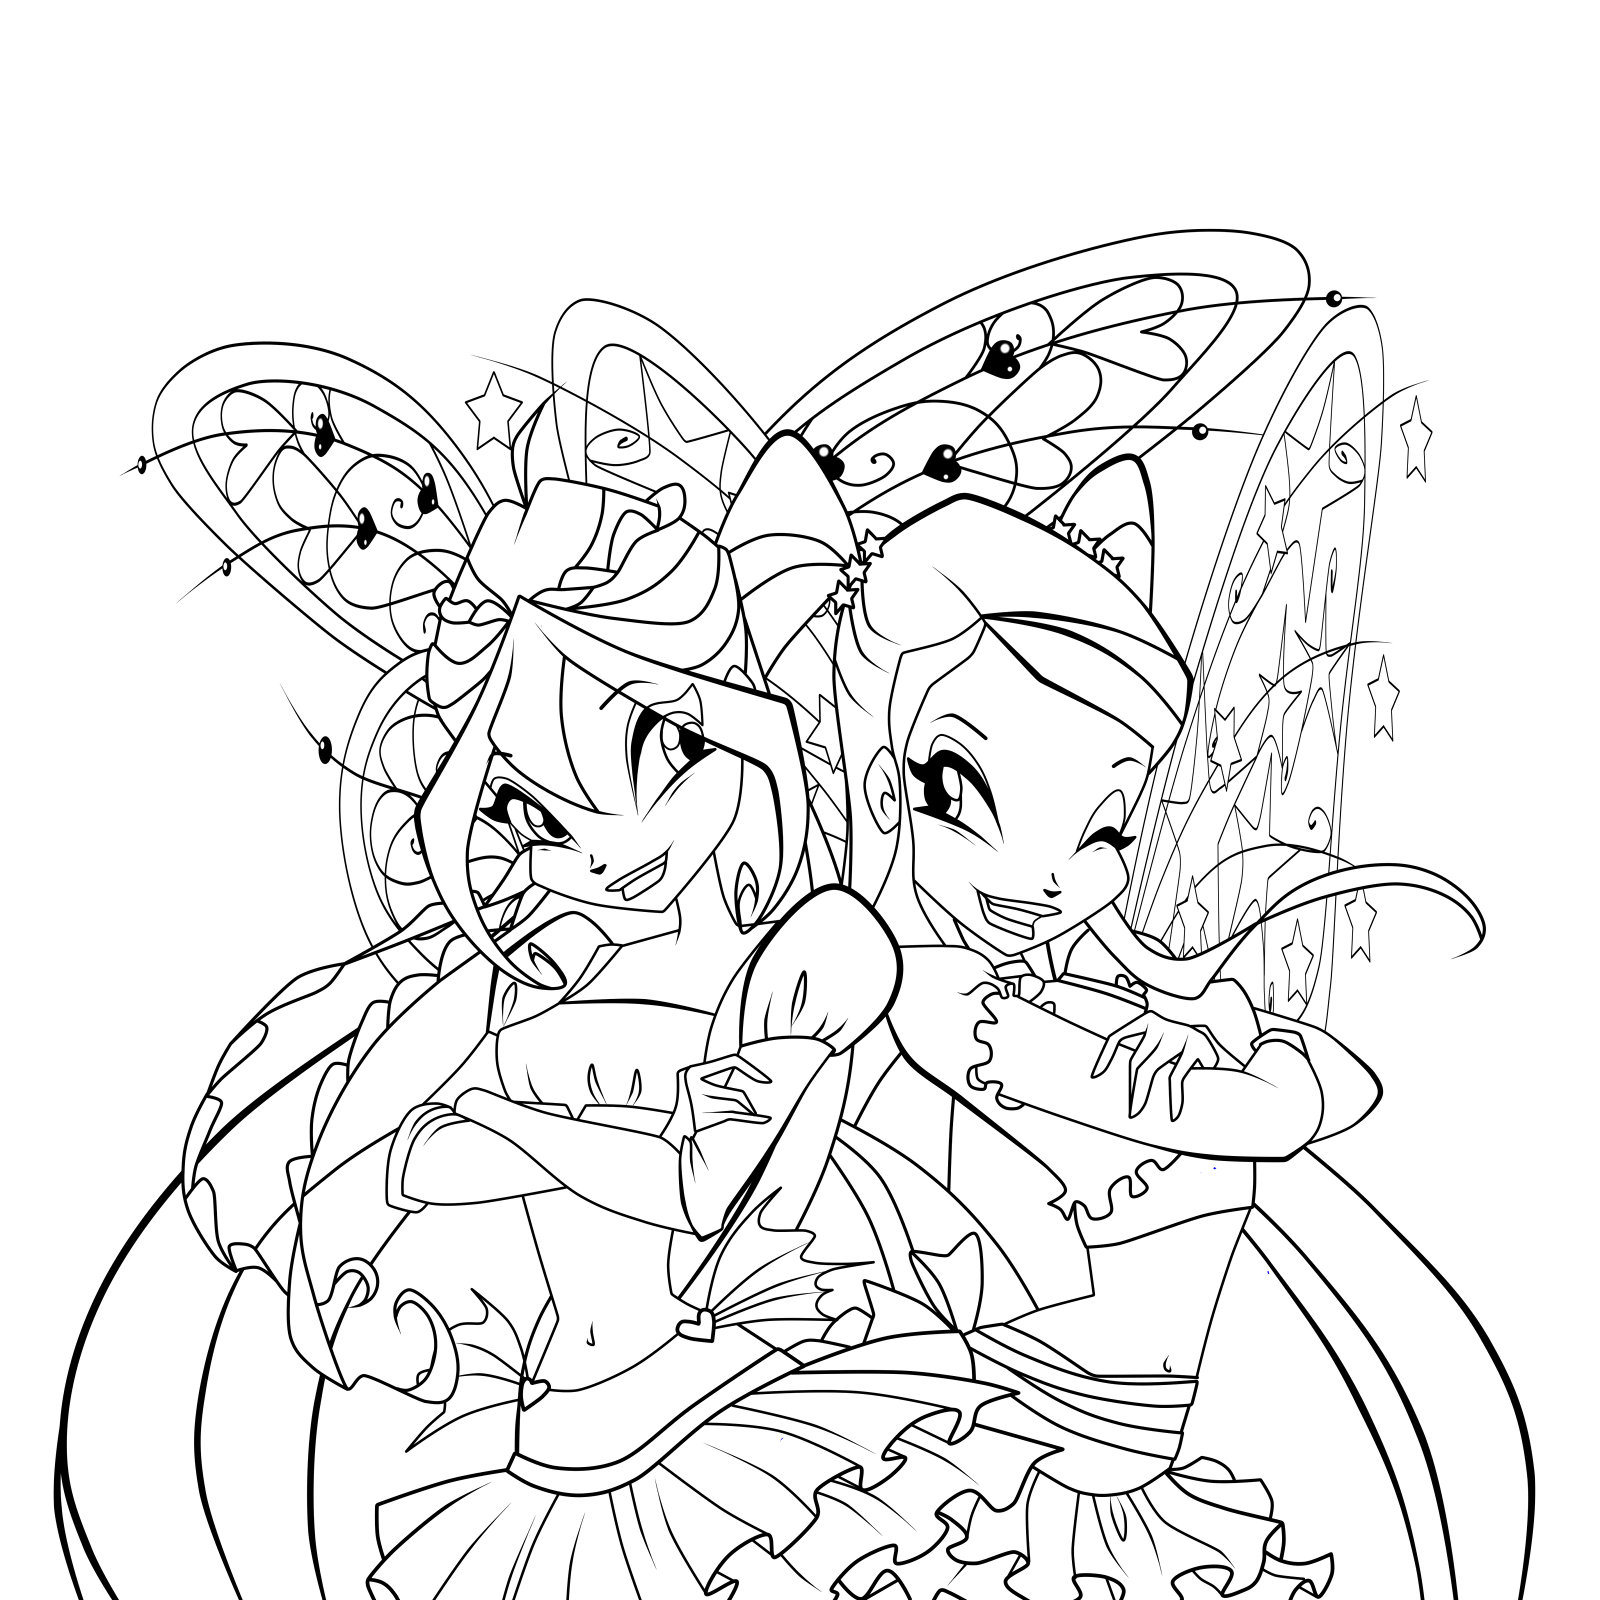 Image Result For Winx Club Harmonix Coloring Pages Disney Coloring Pages Coloring Pages Winx Club